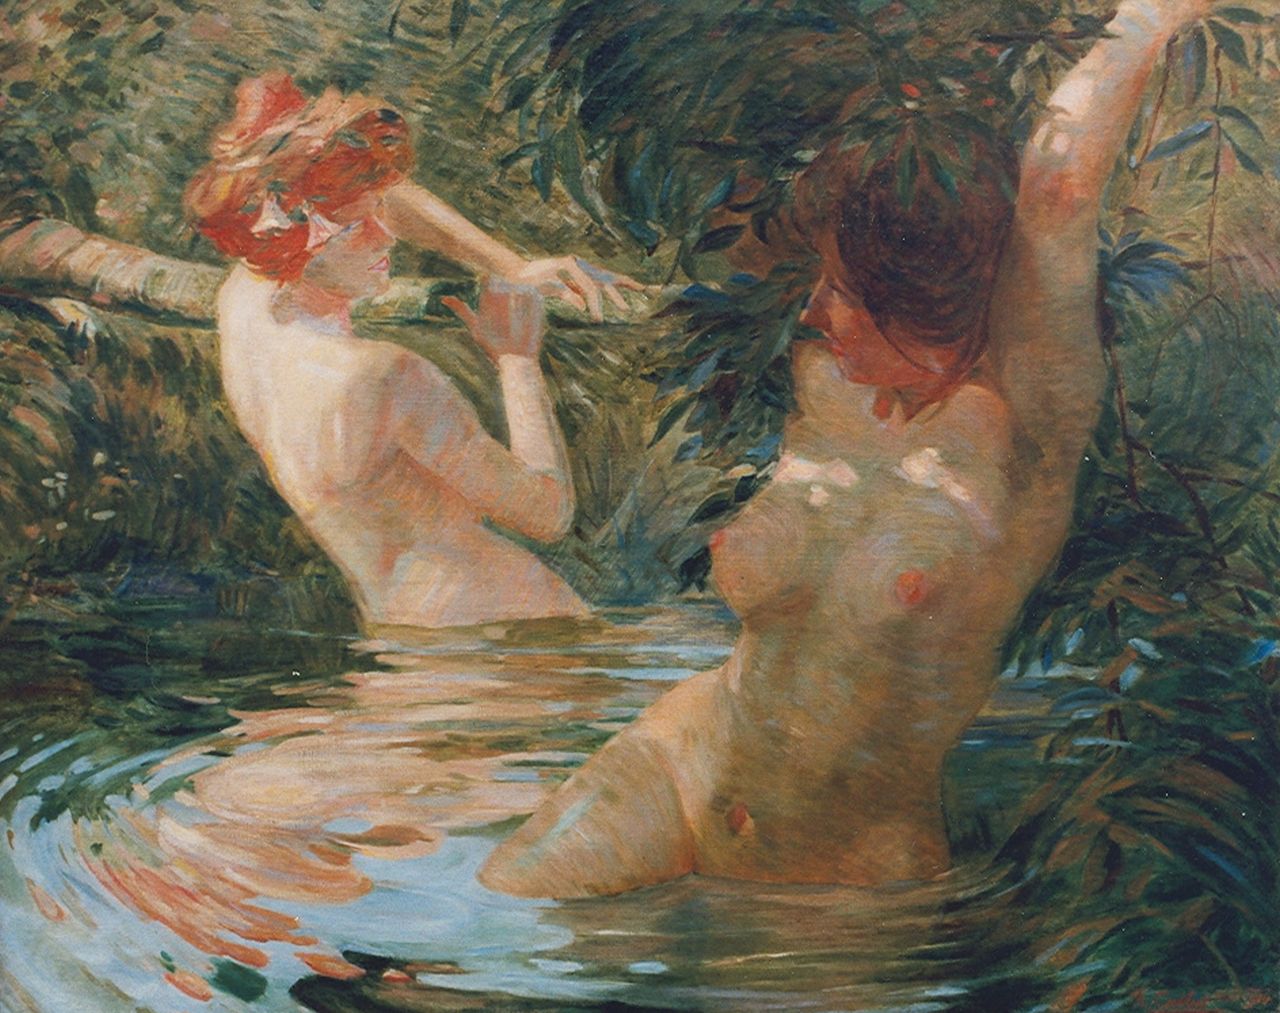 Calbet A.  | Antoine Calbet, Two bathers in a forest pond, oil on canvas 80.7 x 100.0 cm, signed l.r. and dated 1914